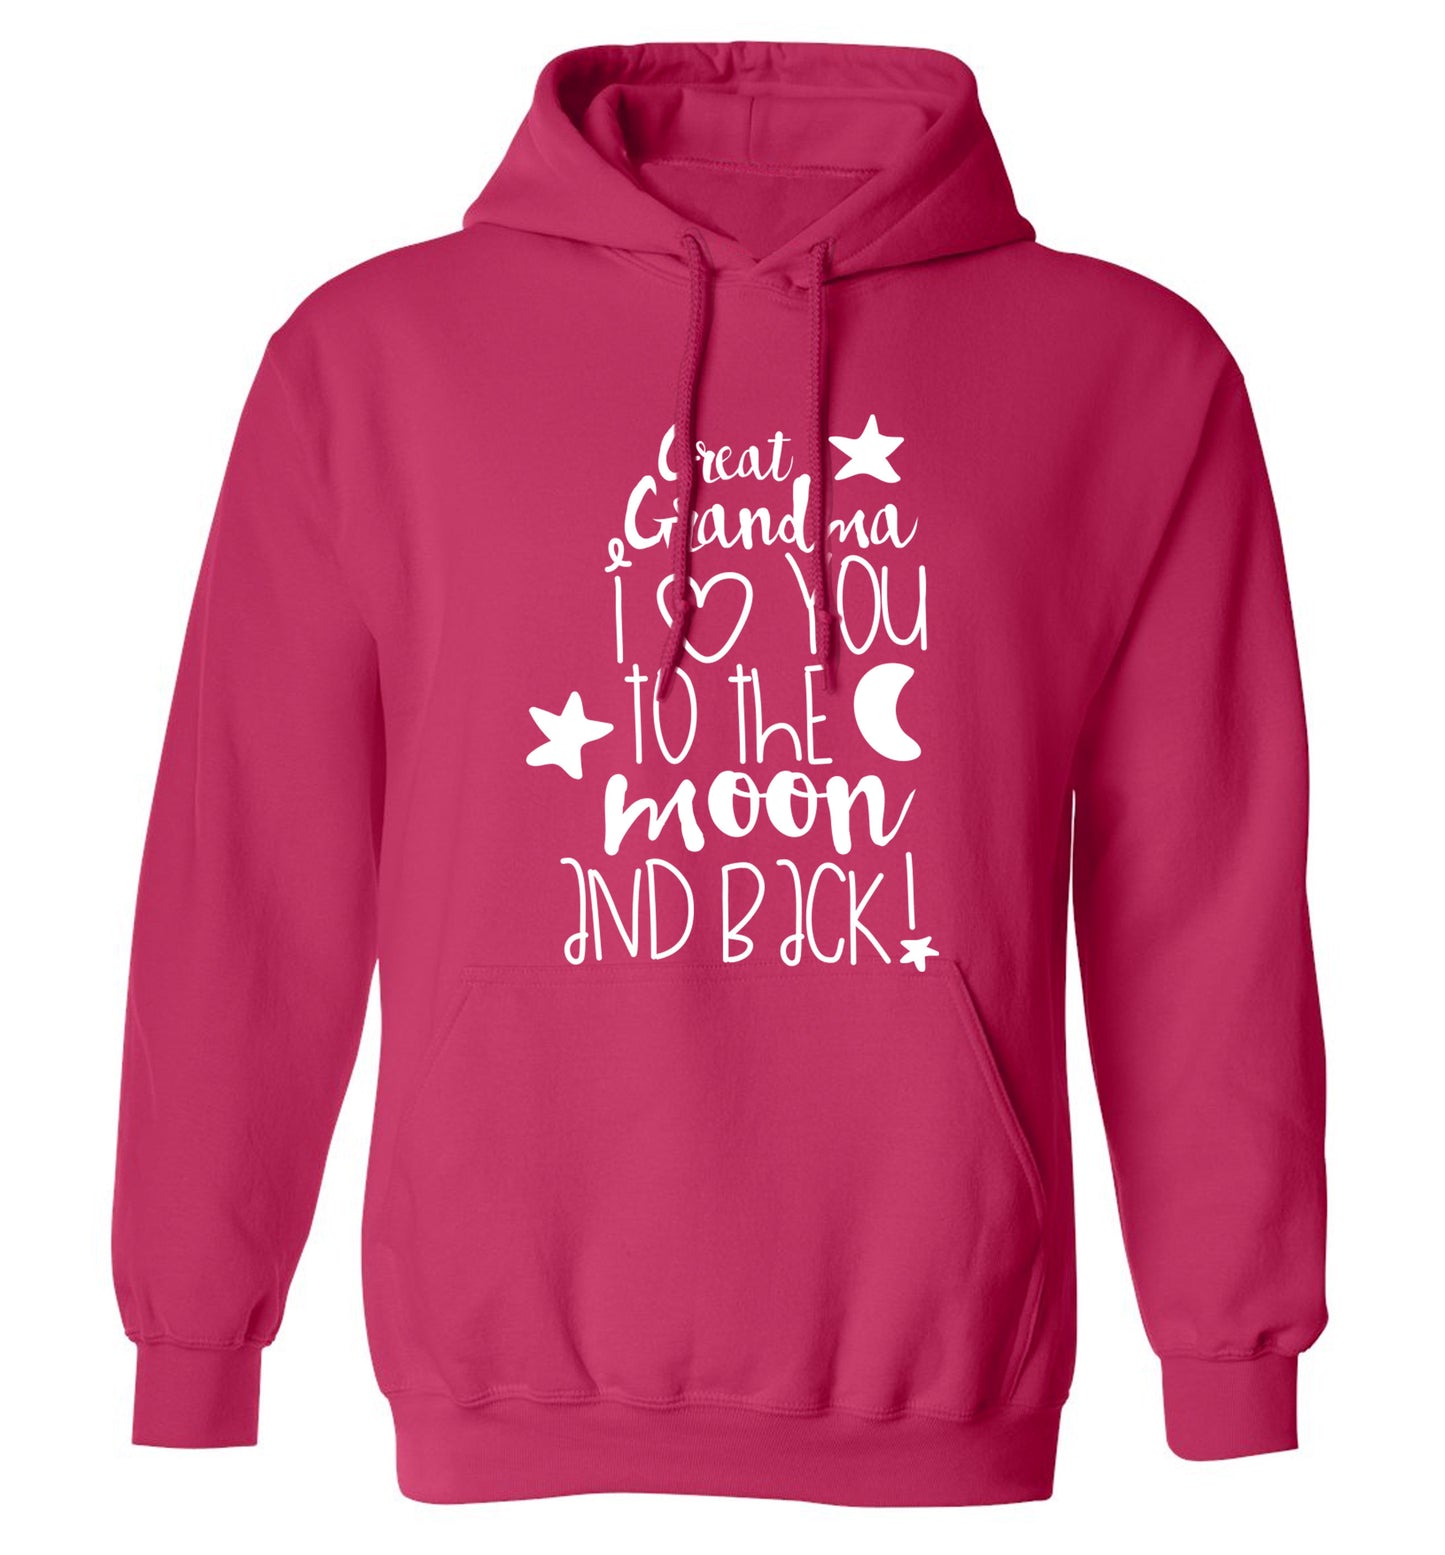 Great Grandma I love you to the moon and back adults unisex pink hoodie 2XL